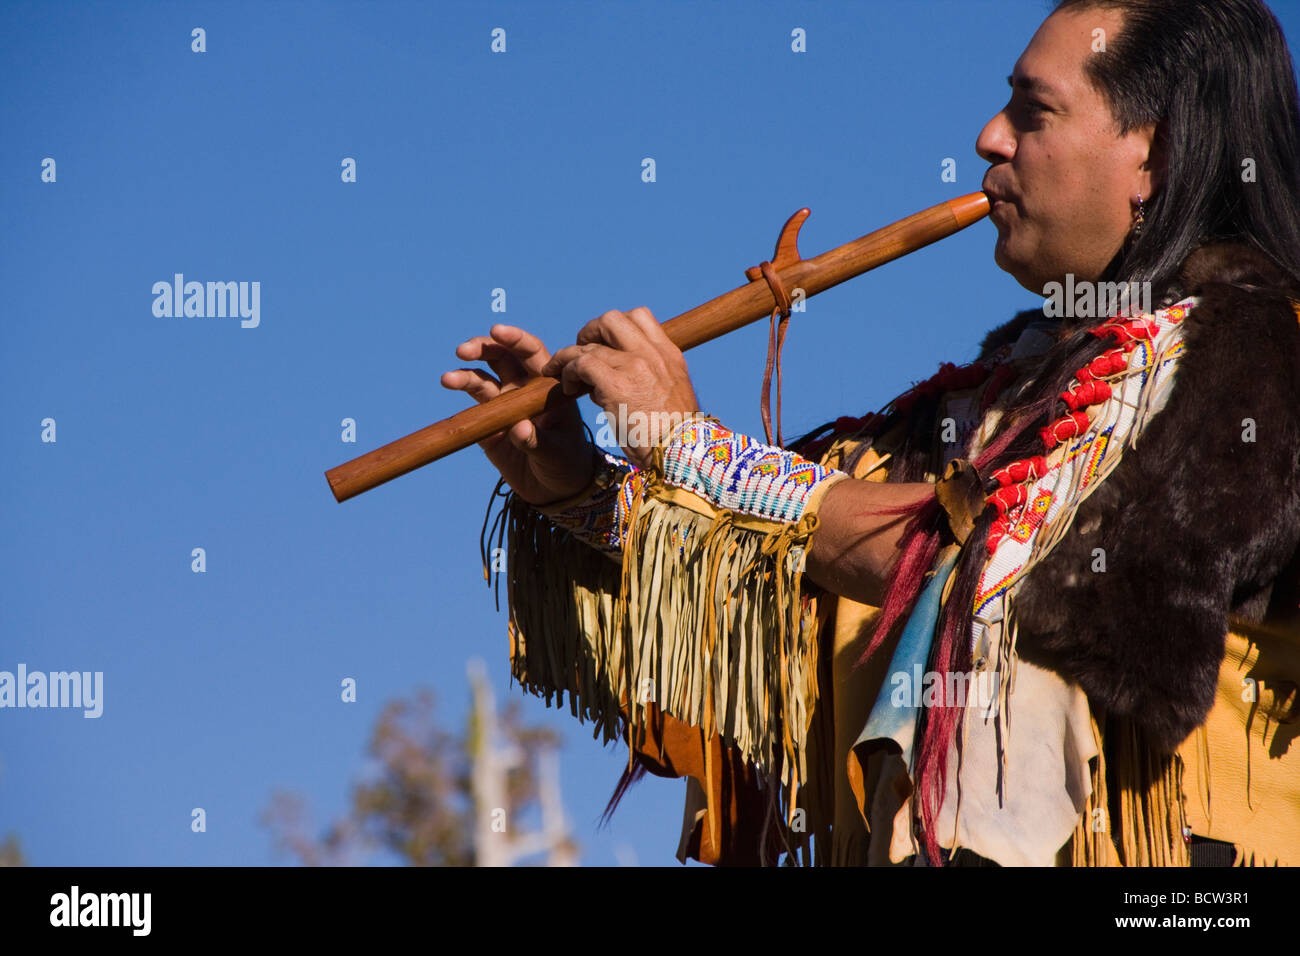 Lakota man in traditional clothing playing a flute, Donner Summit, Truckee, California, USA Stock Photo